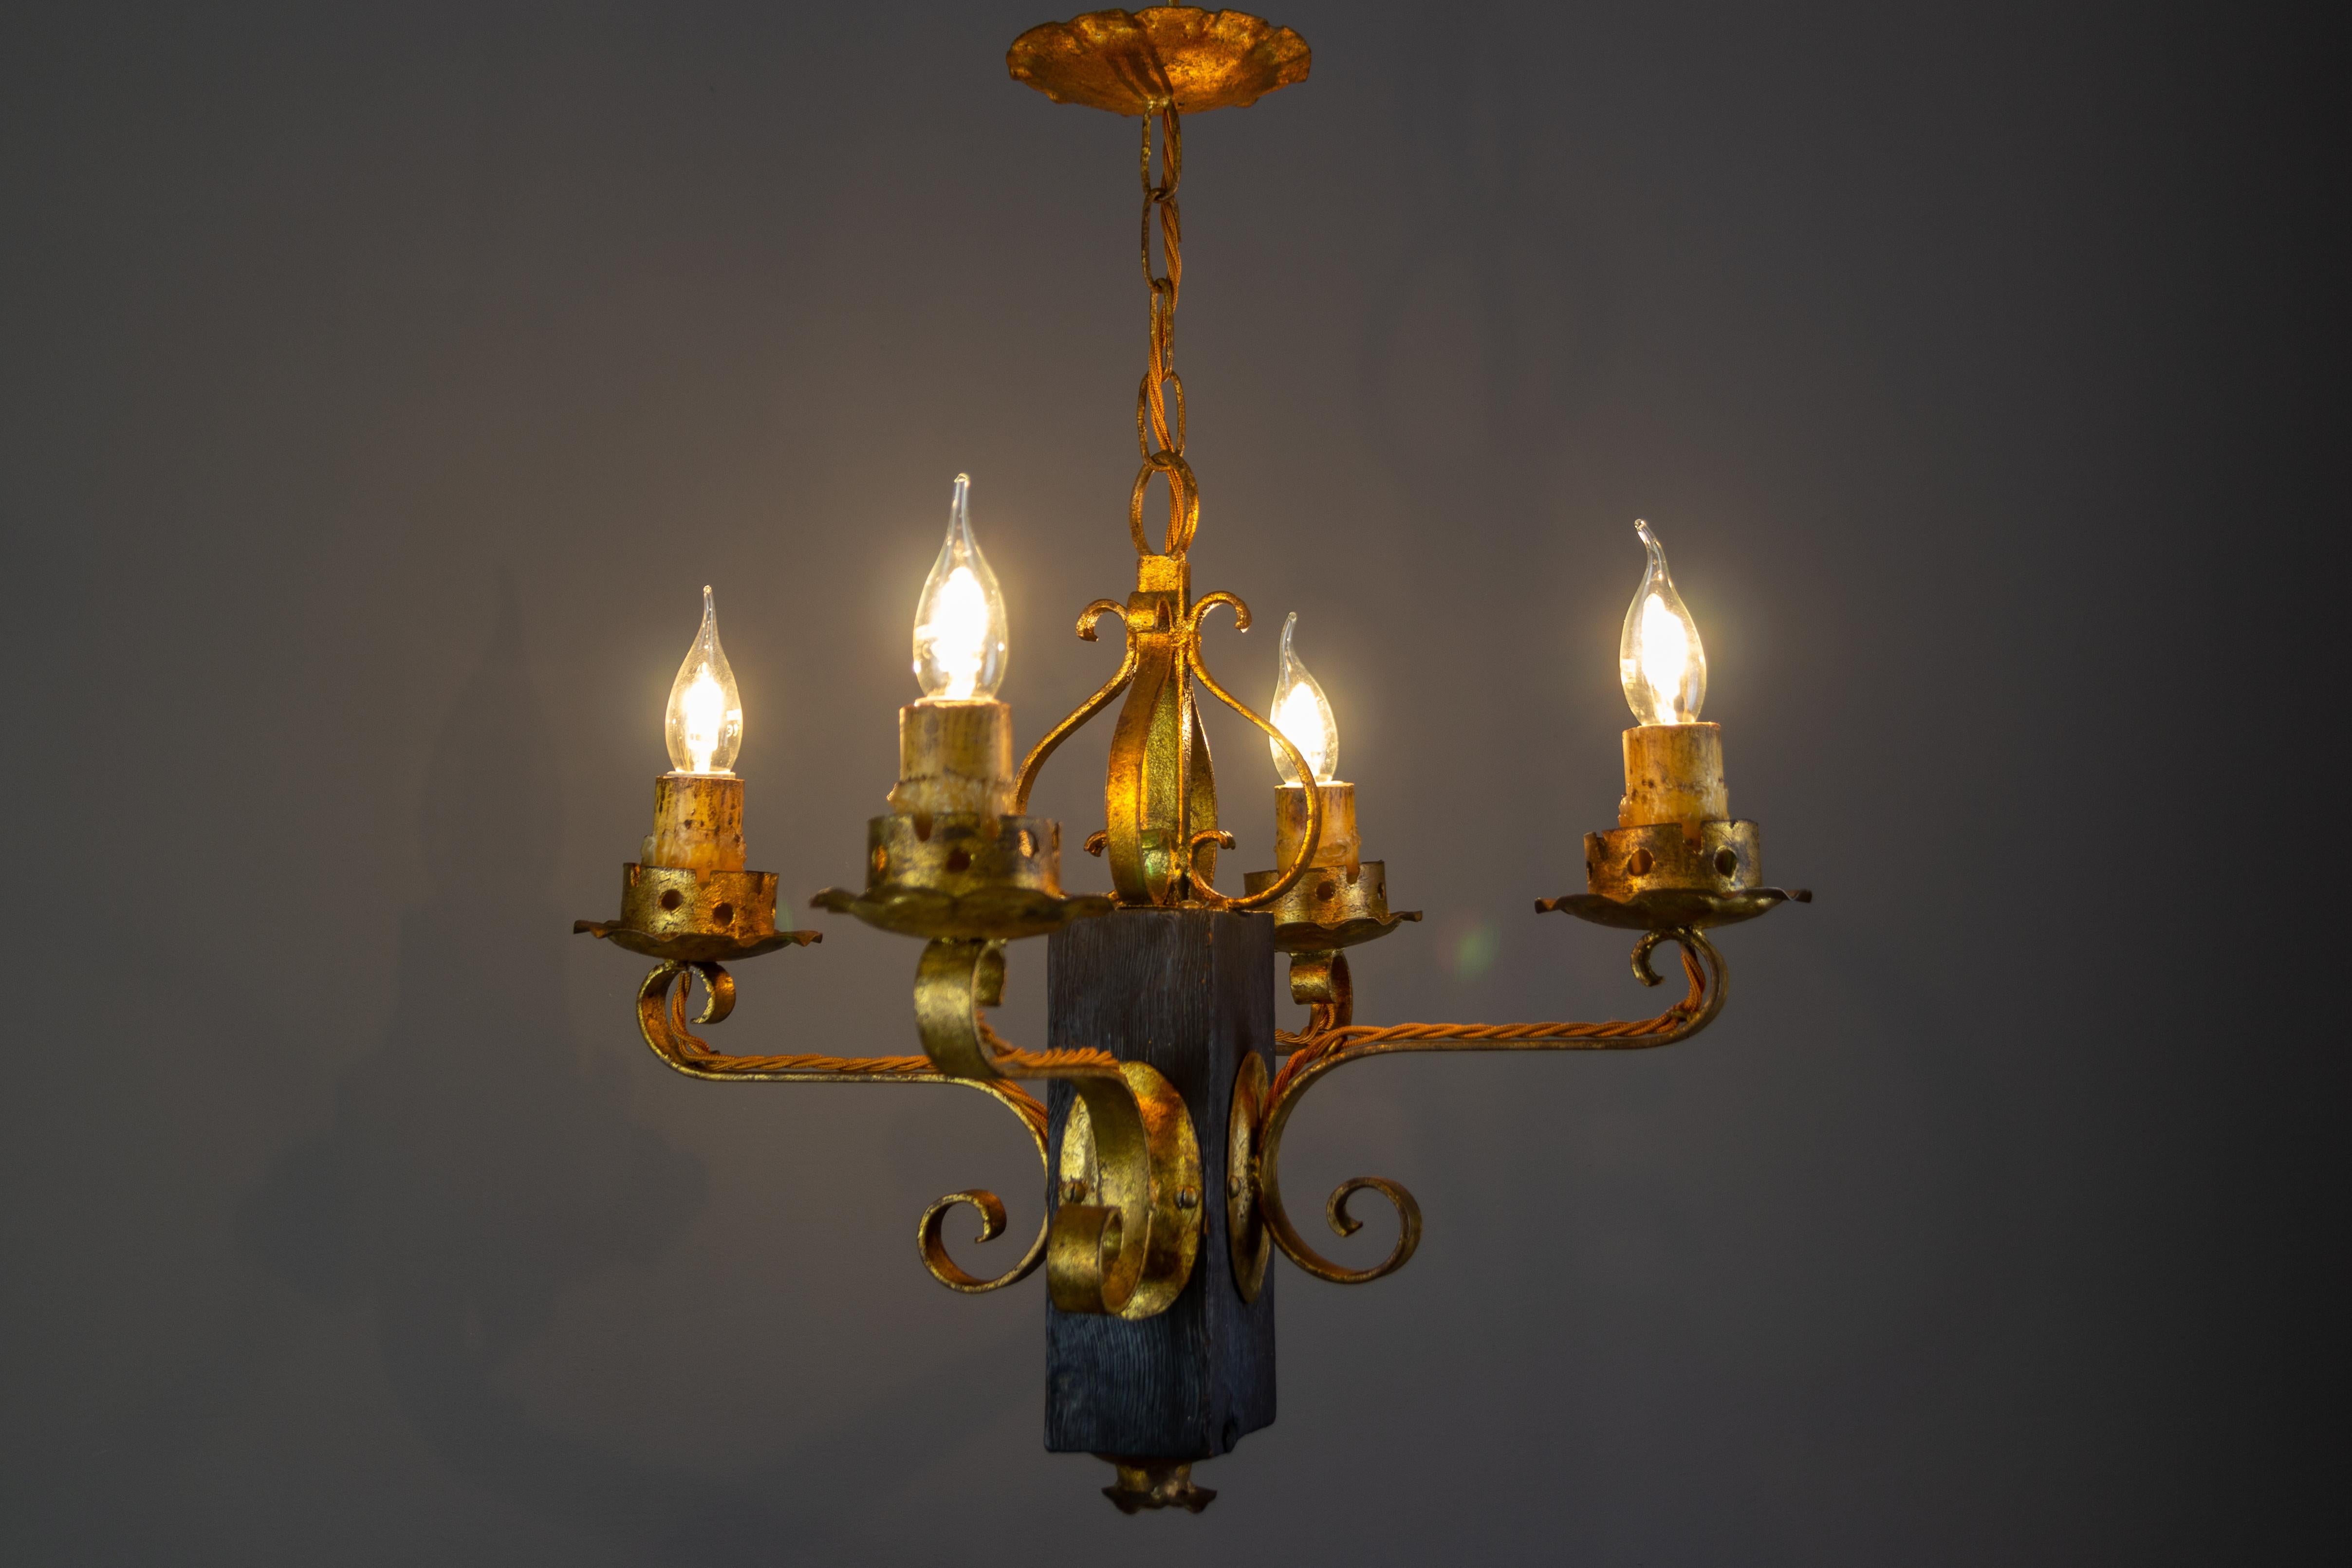 Gilt wrought iron and black wood four-light chandelier or pendant light, Spain, 1930s.
This beautifully crafted and one-of-a-kind light fixture features a black and rectangular wooden base with a golden wrought iron arm on each side.
It is a perfect